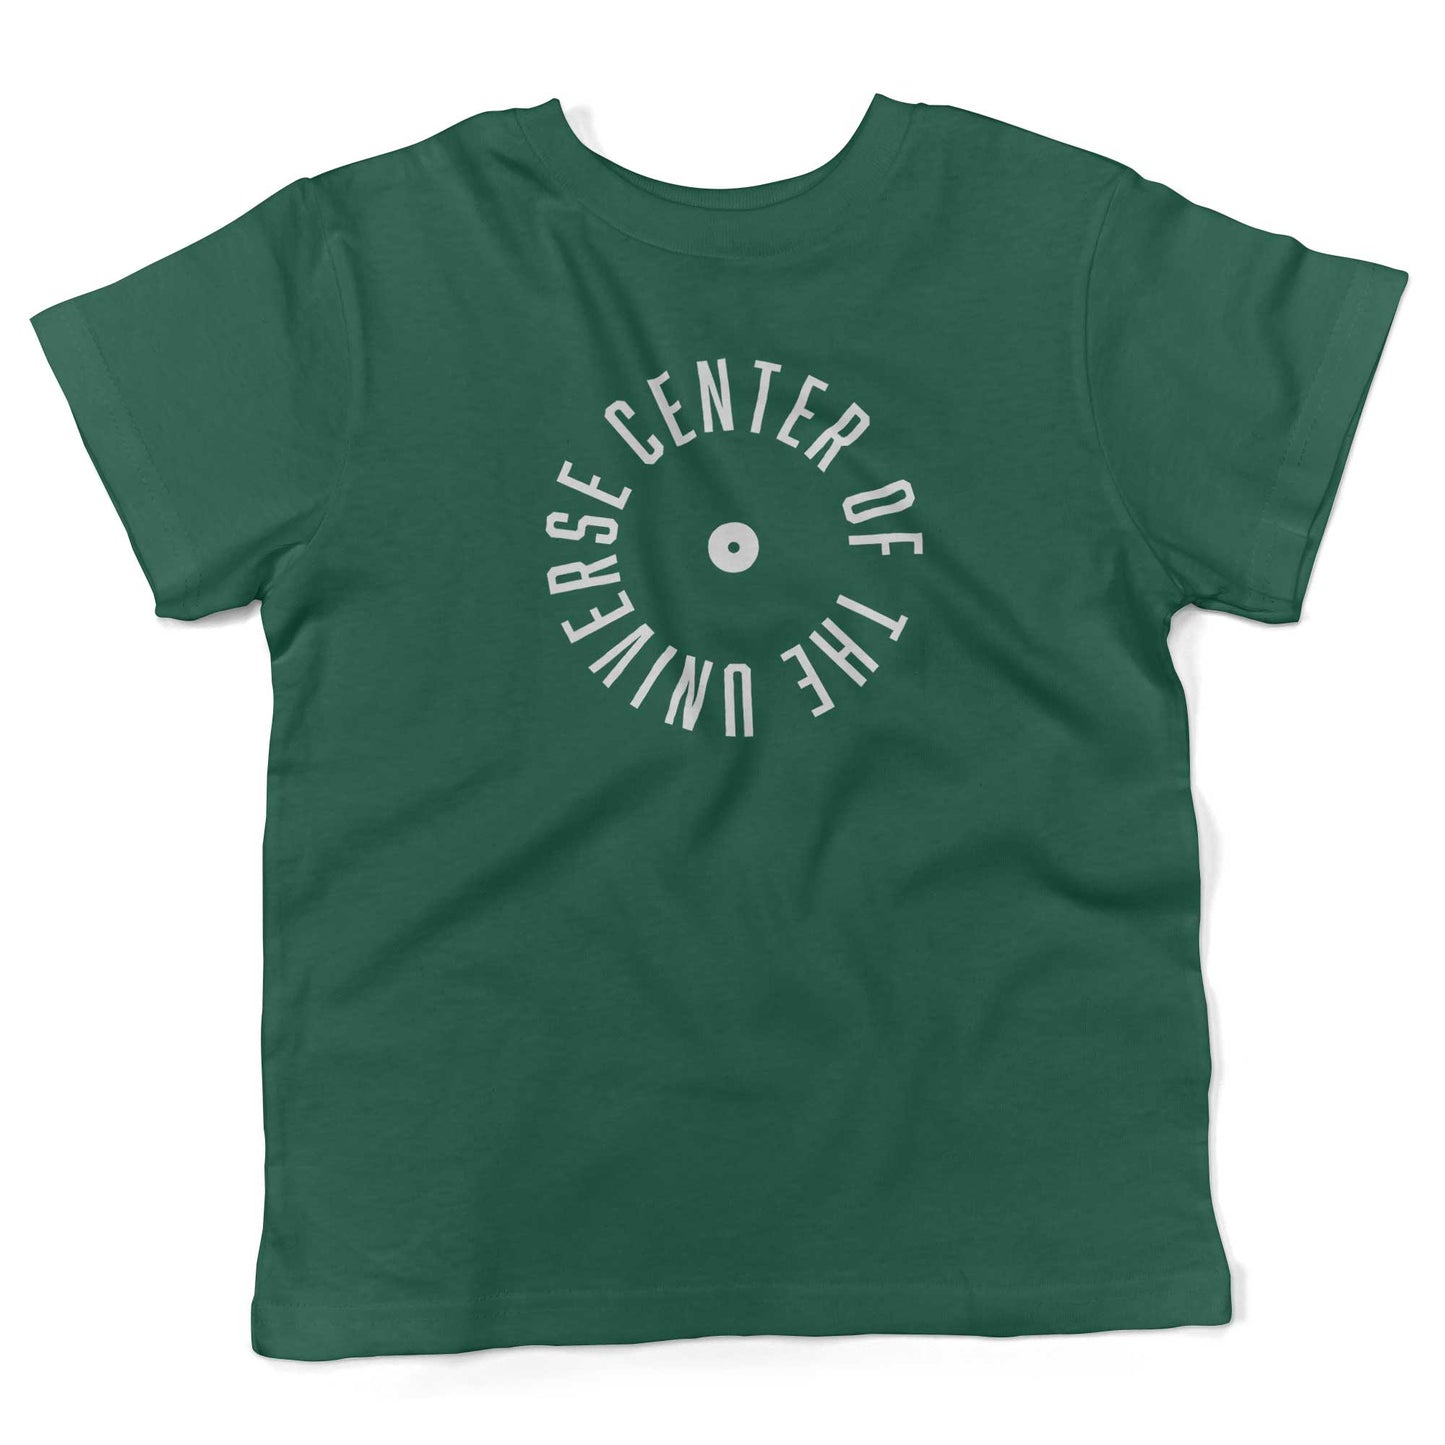 Center Of The Universe Toddler Shirt-Kelly Green-2T